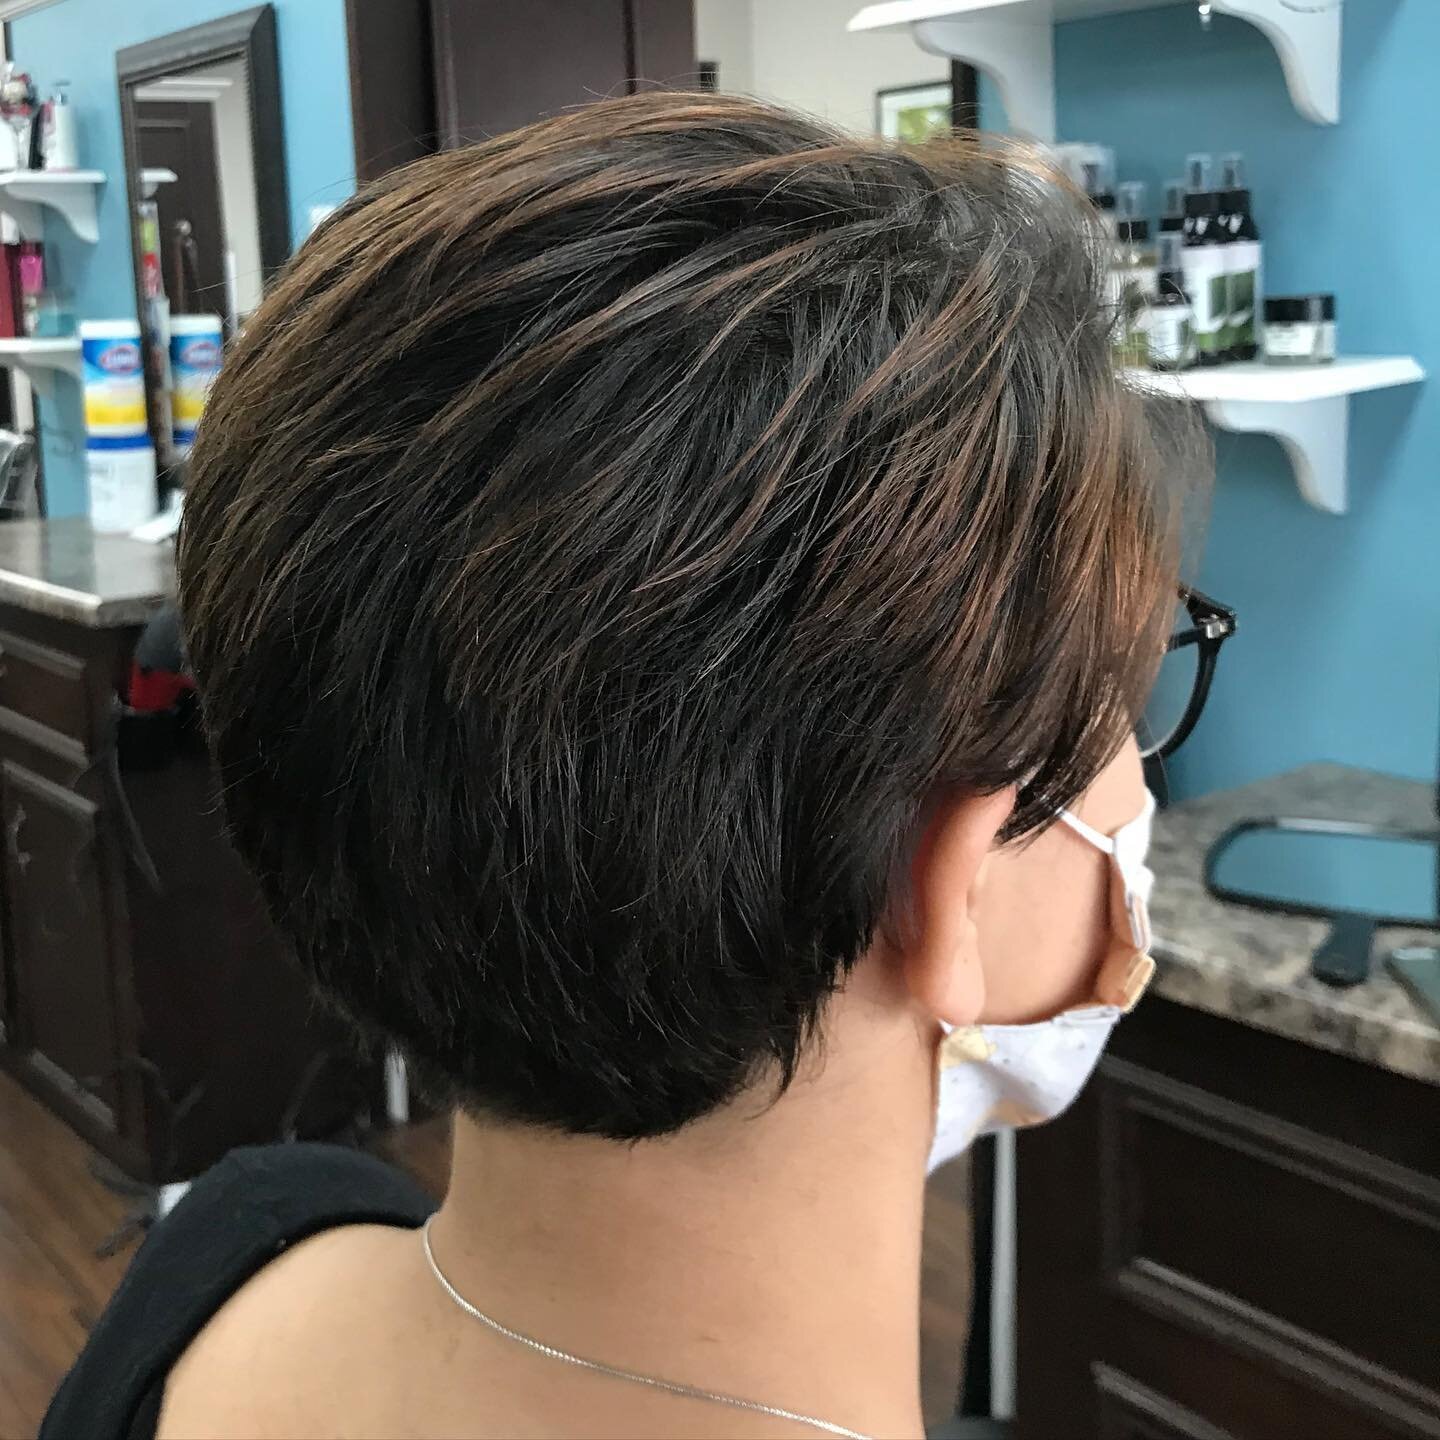 Make the chop for the summer! 
.
Swipe to see this lovely lady&rsquo;s shocking before!
.
📞: (574)256-1111